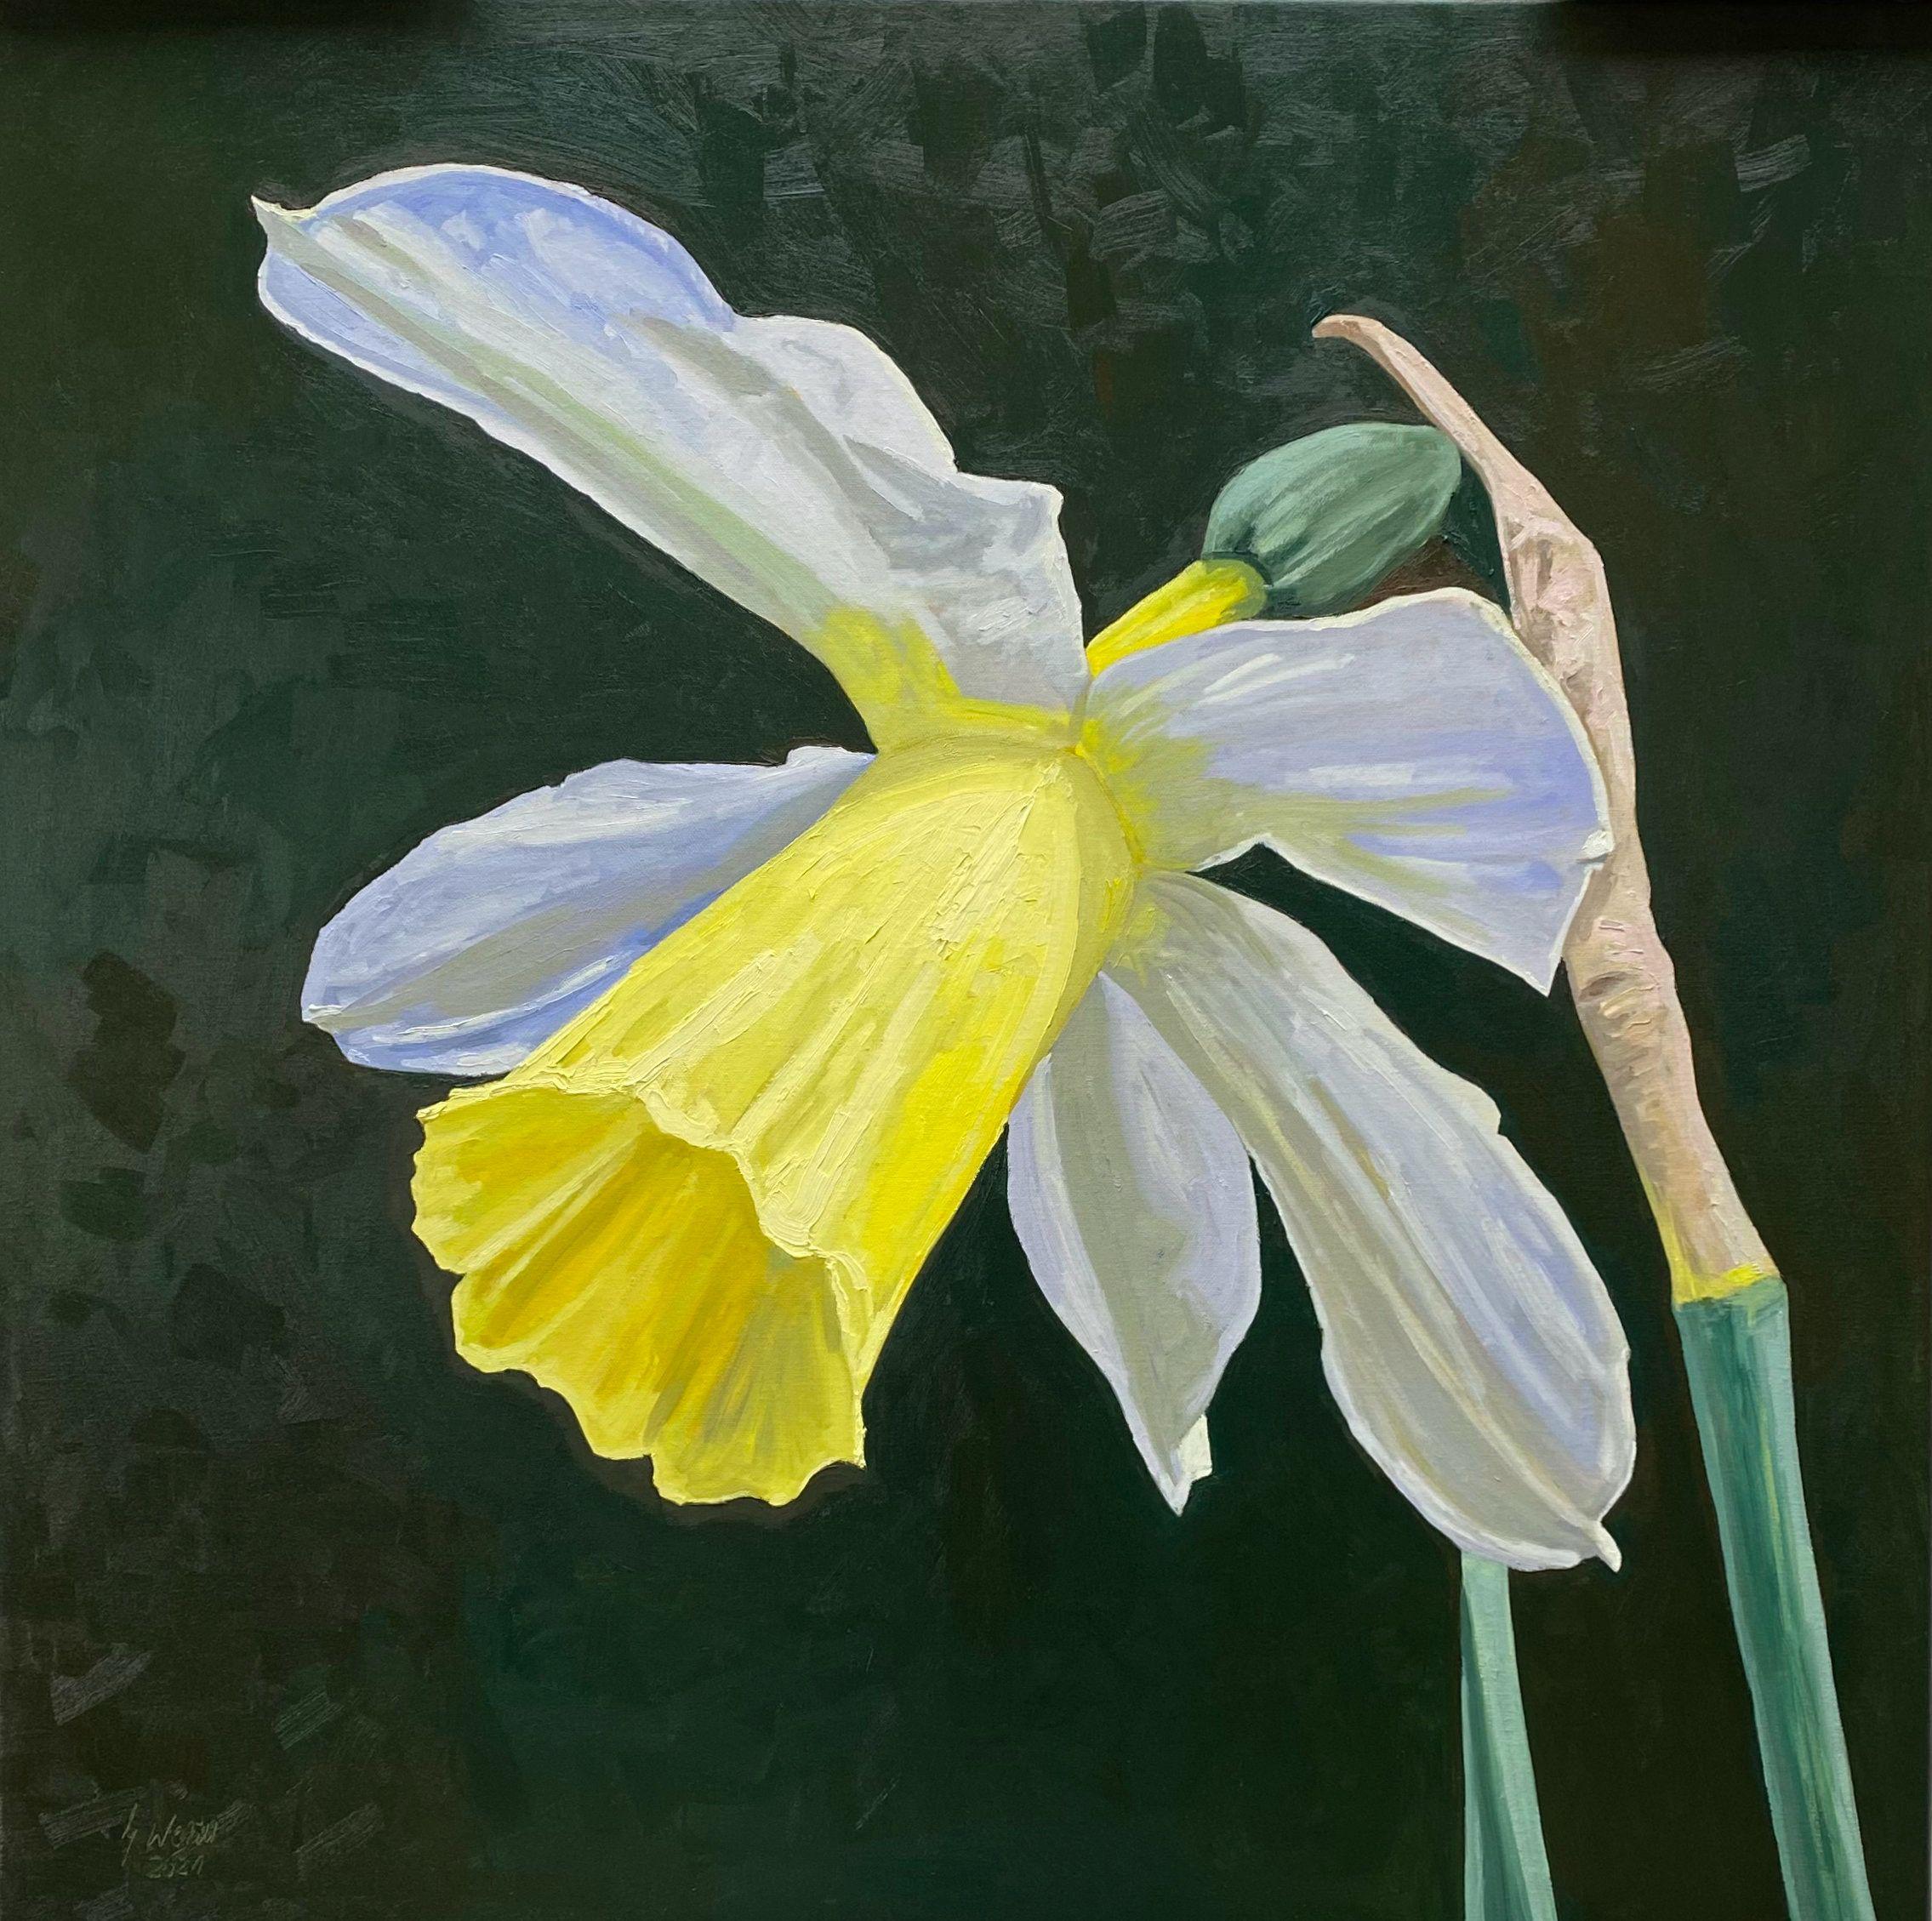 Daffodils Painting Narcissus Wall Art Original Art Jonquil Painting Soft Pastel